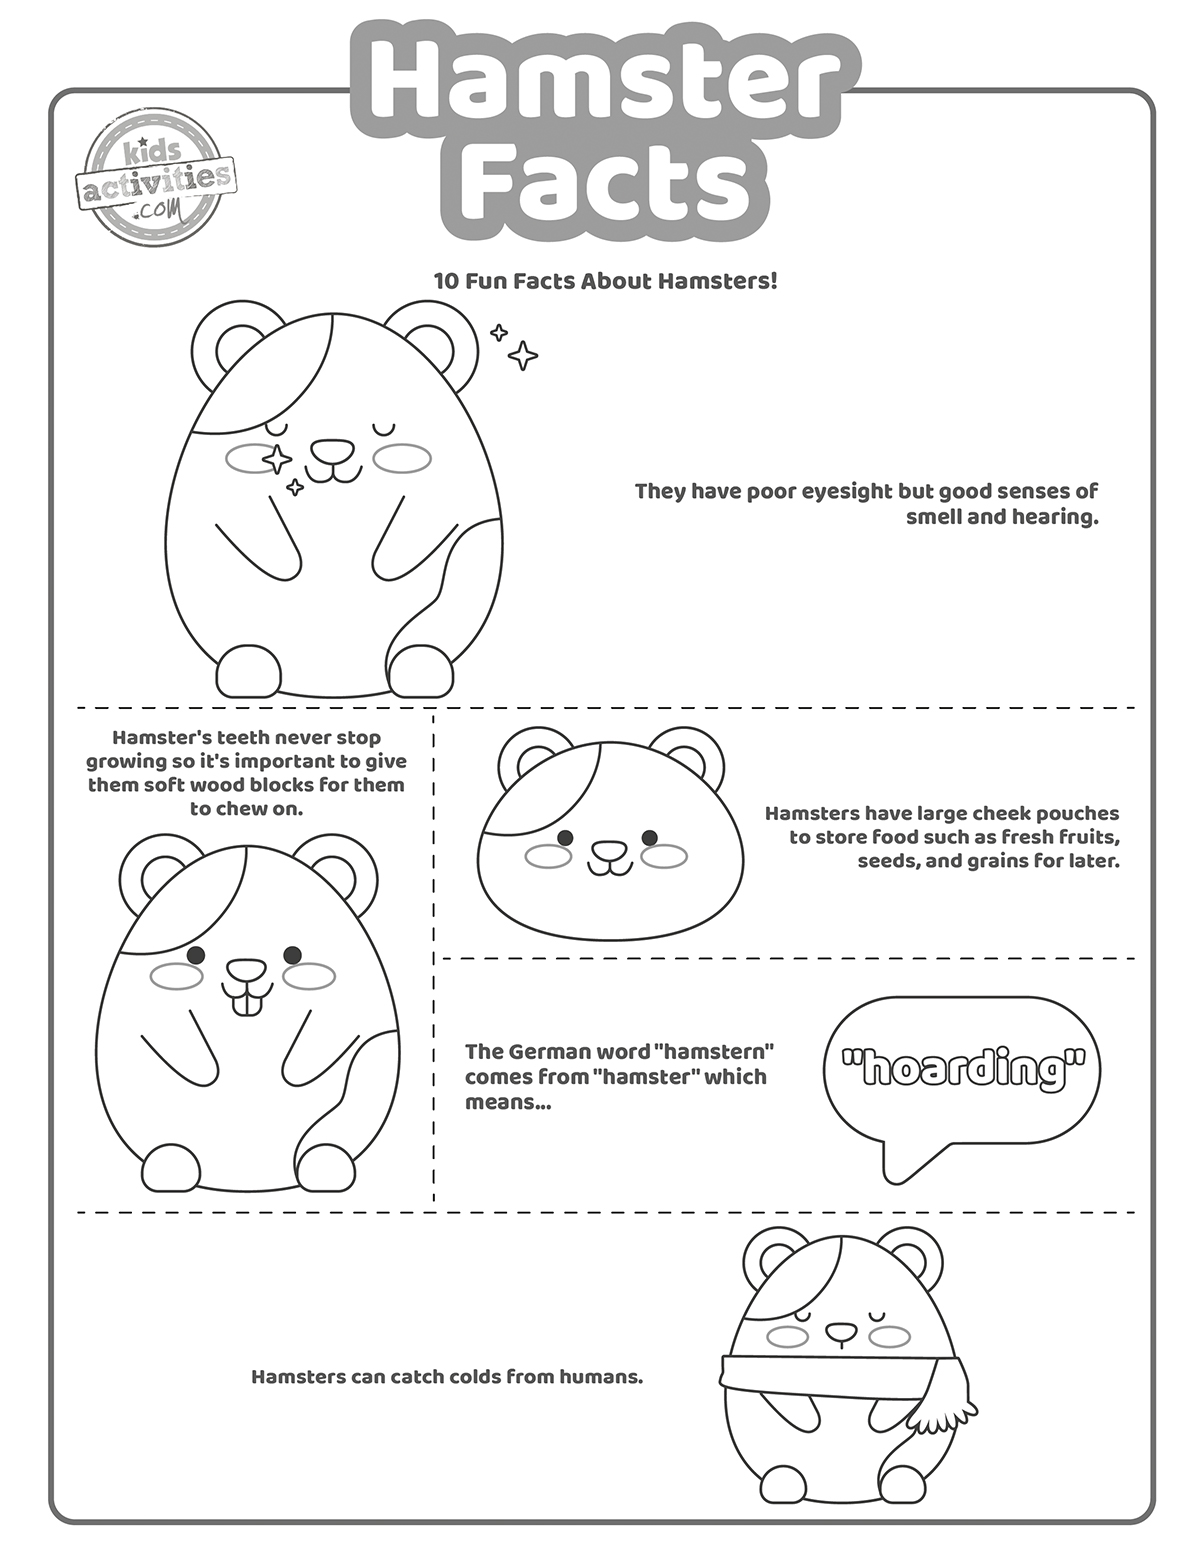 Hamster facts coloring pages - a sheet with different facts about hamsters and drawings representing the facts, coloring page for kids shown in black and white printed pdf version from Kids activities blog. 